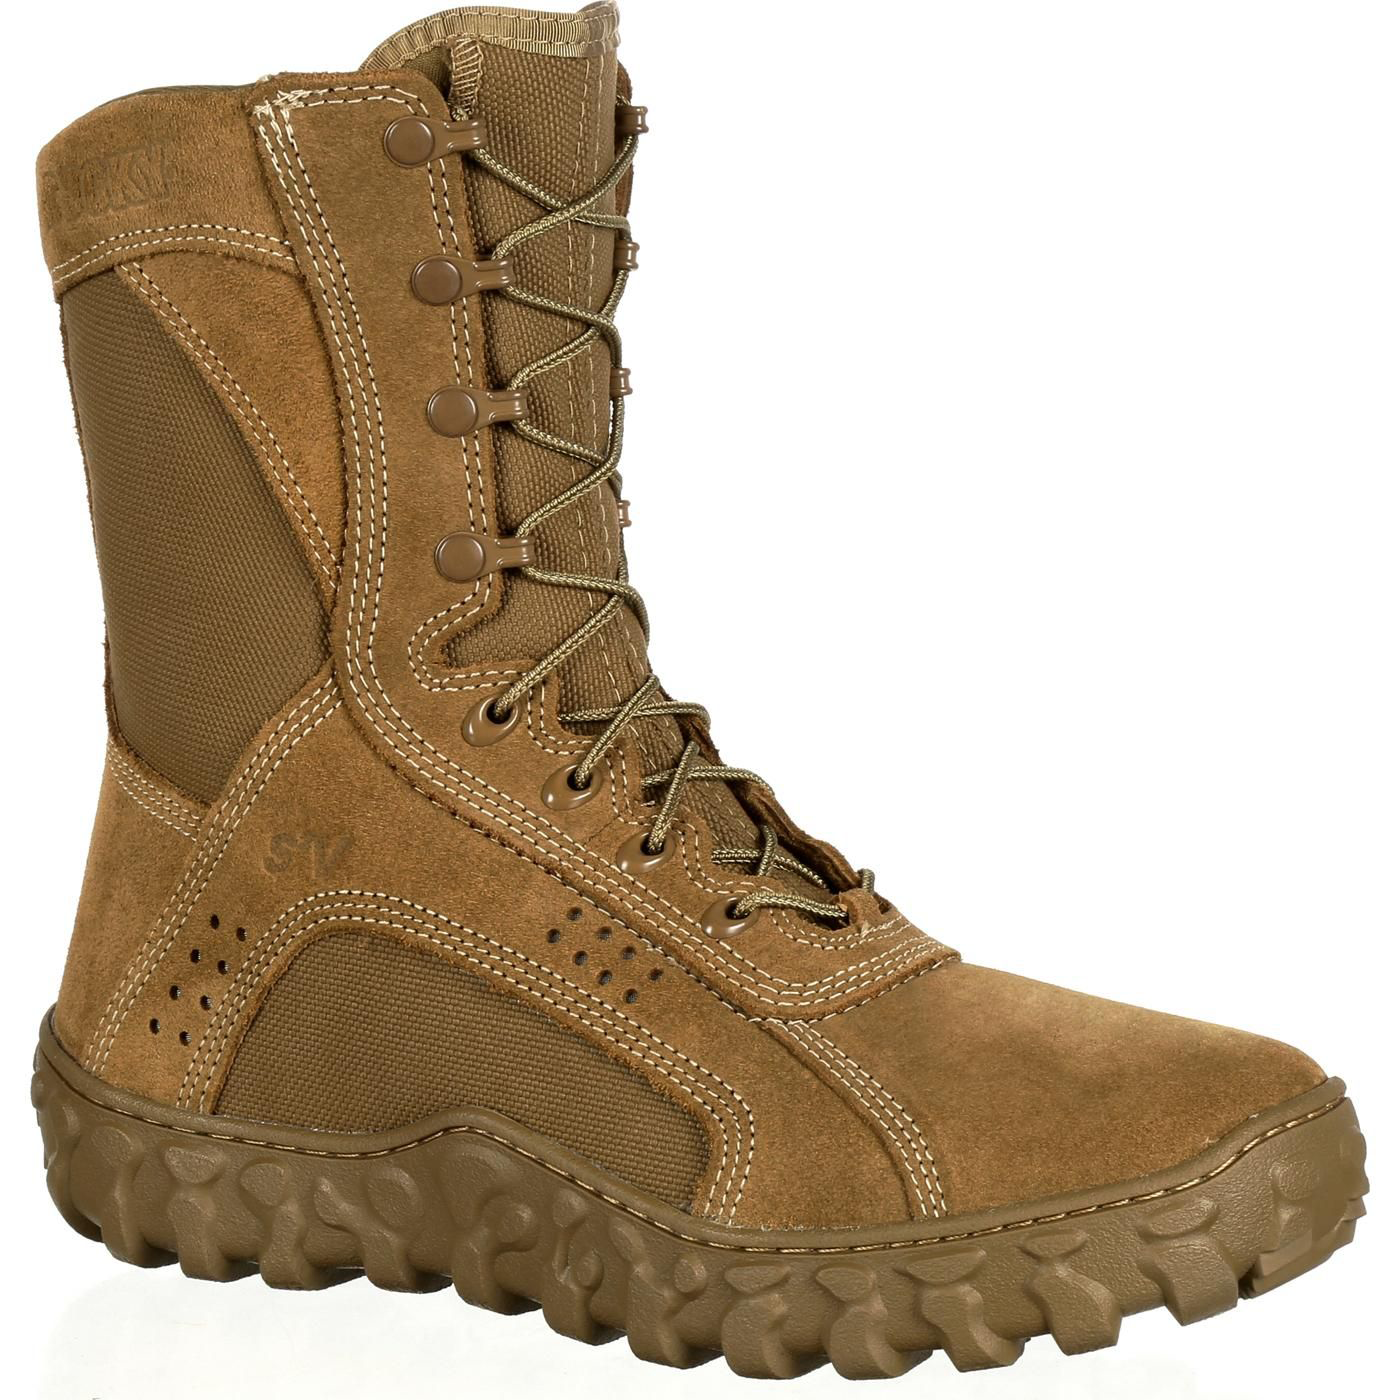 Rocky S2V Tactical Military Boots for Men - Coyote Brown - 3.5M